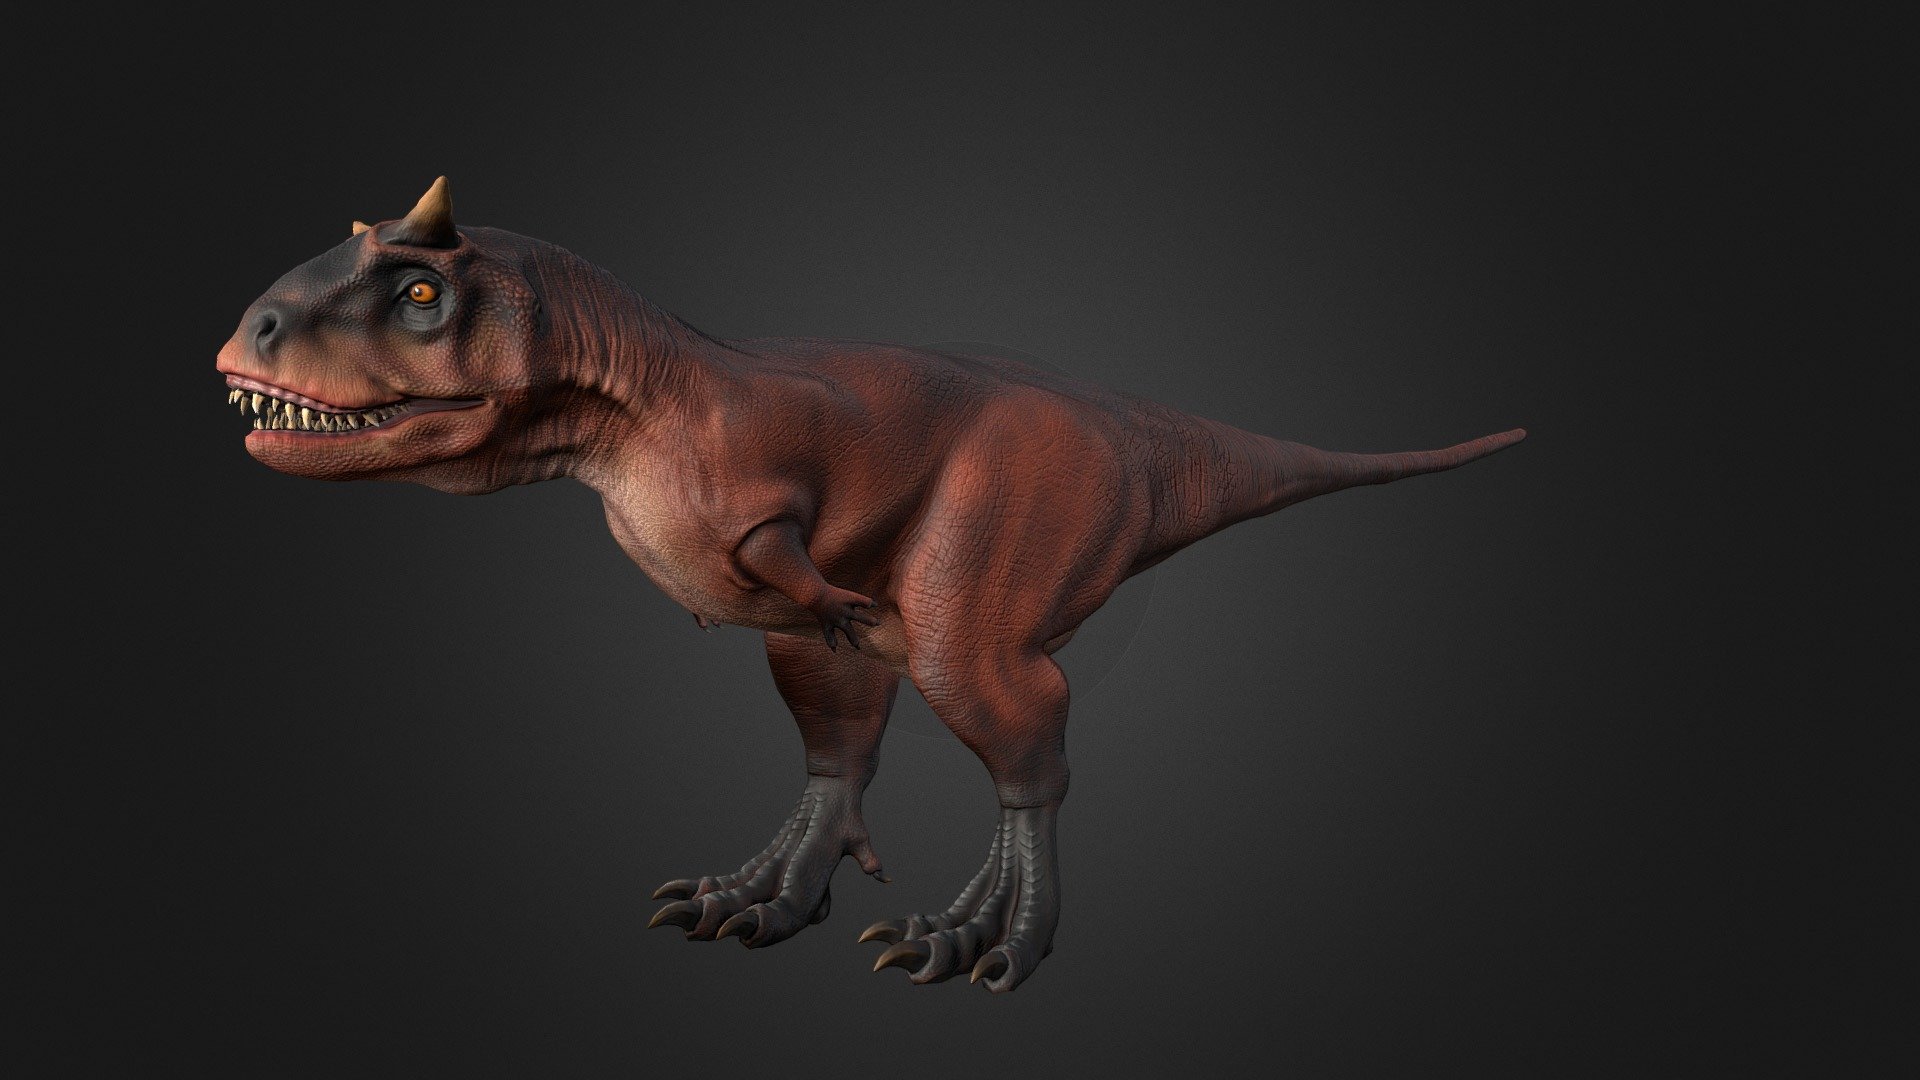 This asset has Carnotaurus model.

Model has 4 LOD.




26300 tris

16900 tris

12100 tris

6500 tris

Diffuse, normal and metallic / roughness maps (all maps 2048x2048).

105 animations (IP/RM)

Attack(1-6), Walk (F,FL,FR,B,BL,BR), Run (F,FL,FR),Run_attack(1-2), Run_Jump, Trot (F,FL,FR), Trot_Attack(1-2), Swim (F,FL,FR,), Swim_Idle, Swim_turn(Left/Right), Jump_In_Place, Jump_F, Jump (start/landing), Jump_Loop (up, horisontal, down),Hit (F,M,B)(1-2) , Lie (Start/end), Lie_Idle, Sleep (start, idle, end),Sit_Idle (1-2), Sit (start/end), Idle 1-3,Roar 1-2,Roar (run/walk/trot), death (1-3), eat (1-2), pick up food (1-2),Drink start/end, Drink_Idle(1-2) ,Turn (left/right)(45/90*) etc.

If you have any questions, please contact us by mail: Chester9292@mail.ru - Carnotaurus - Buy Royalty Free 3D model by Rifat3D 3d model